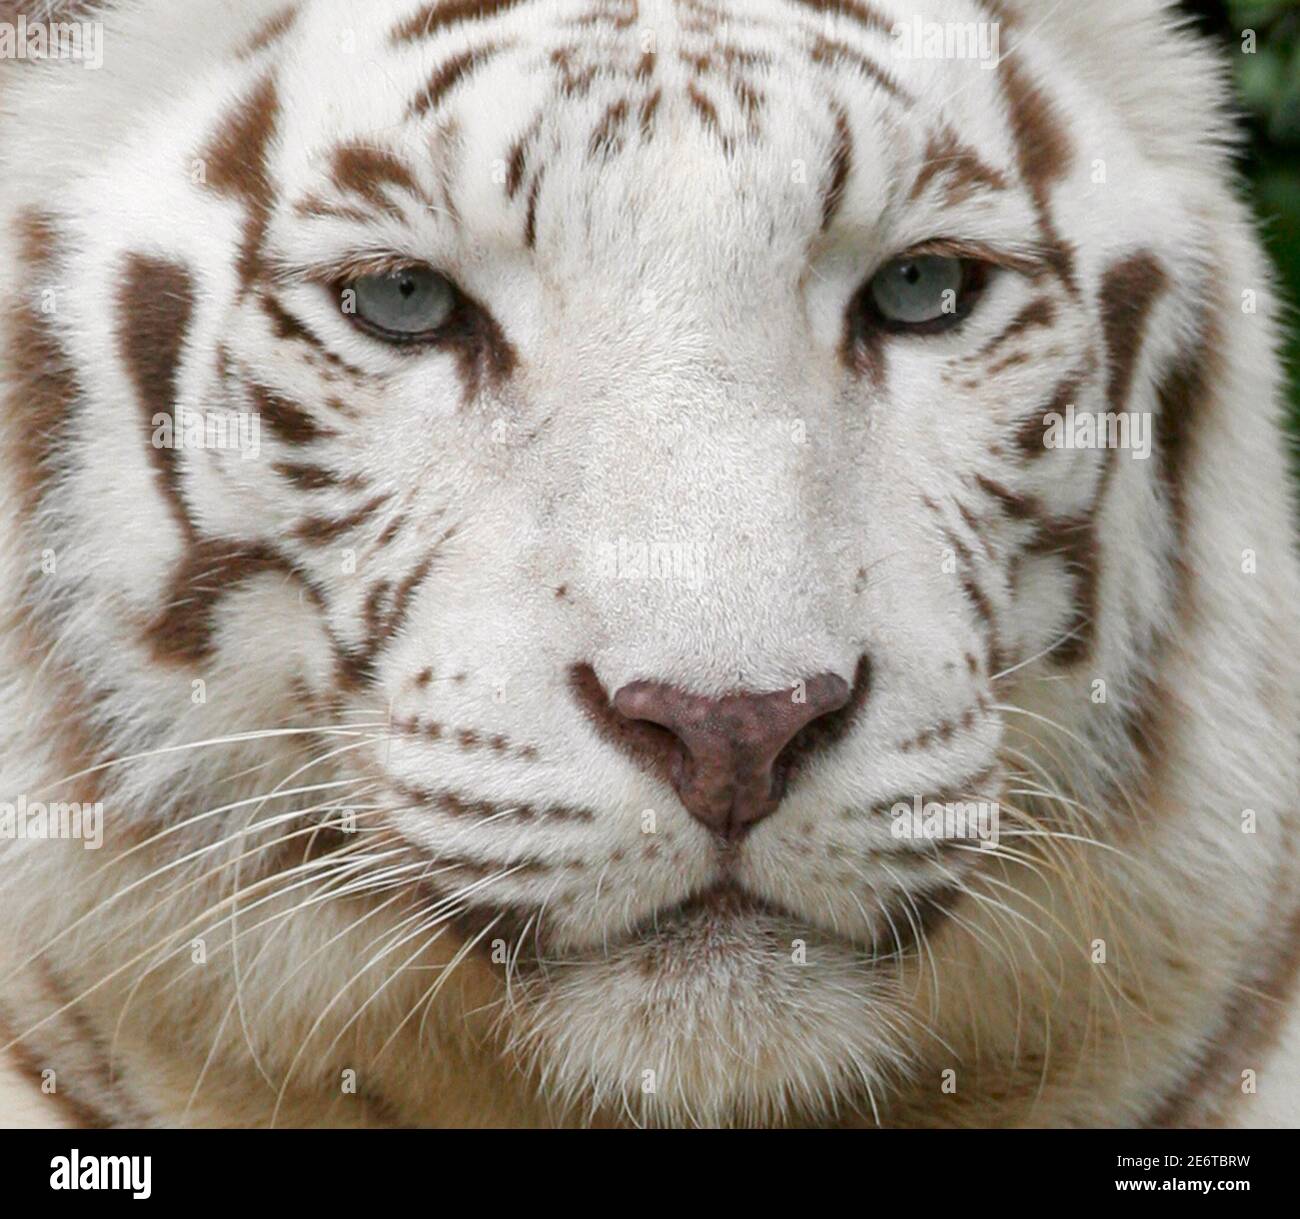 A Bengal white tiger stares at visitors at the Singapore Zoo June 4, 2009.  According to conservation group WWF, there are about 4,000 tigers left in  the world and they are considered